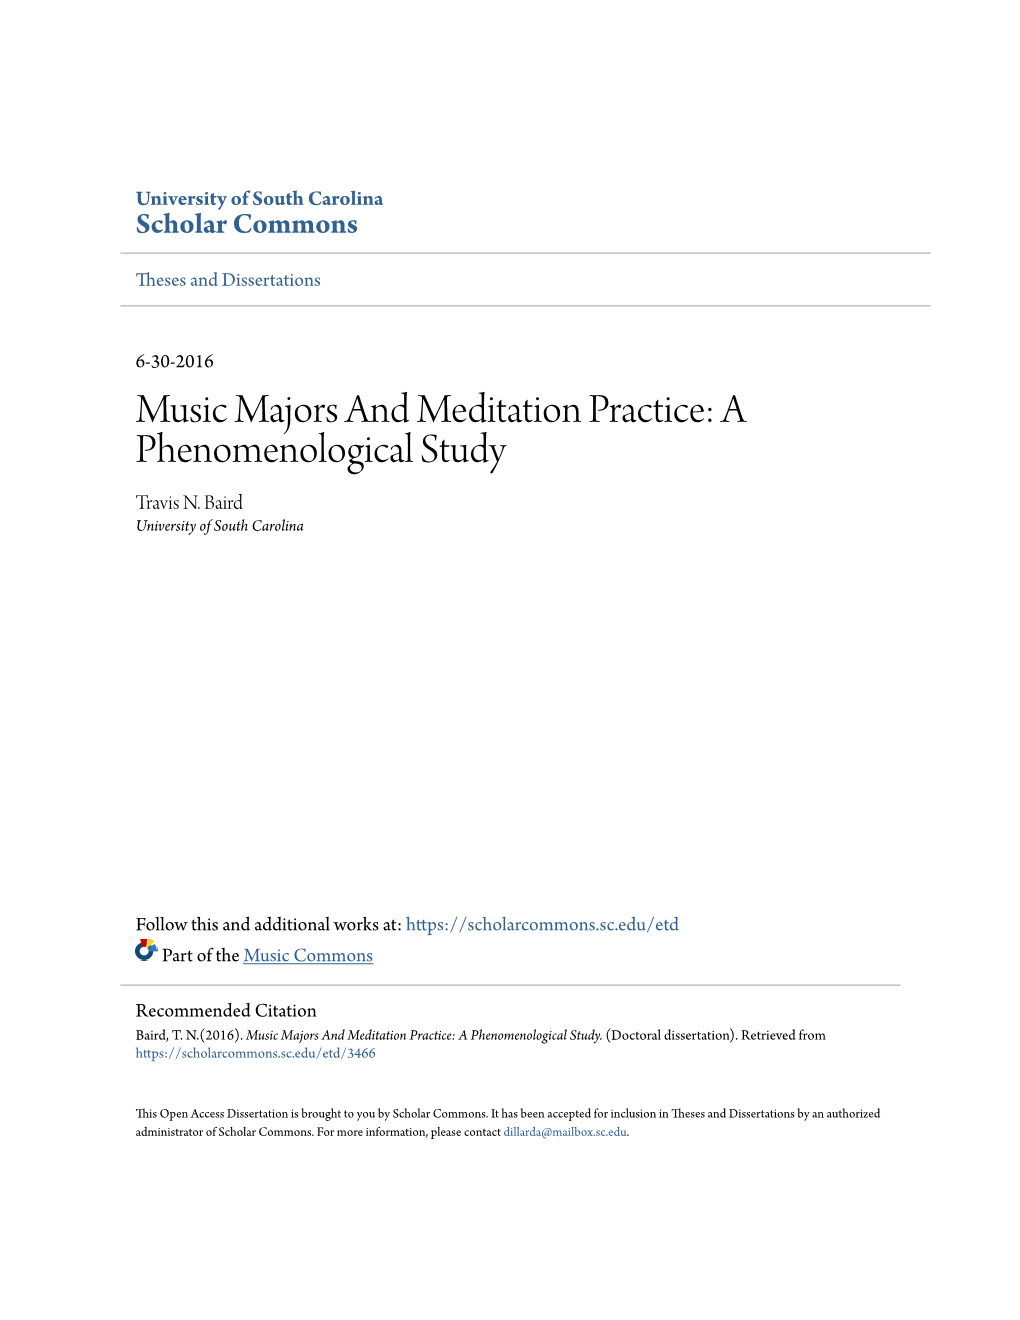 Music Majors and Meditation Practice: a Phenomenological Study Travis N